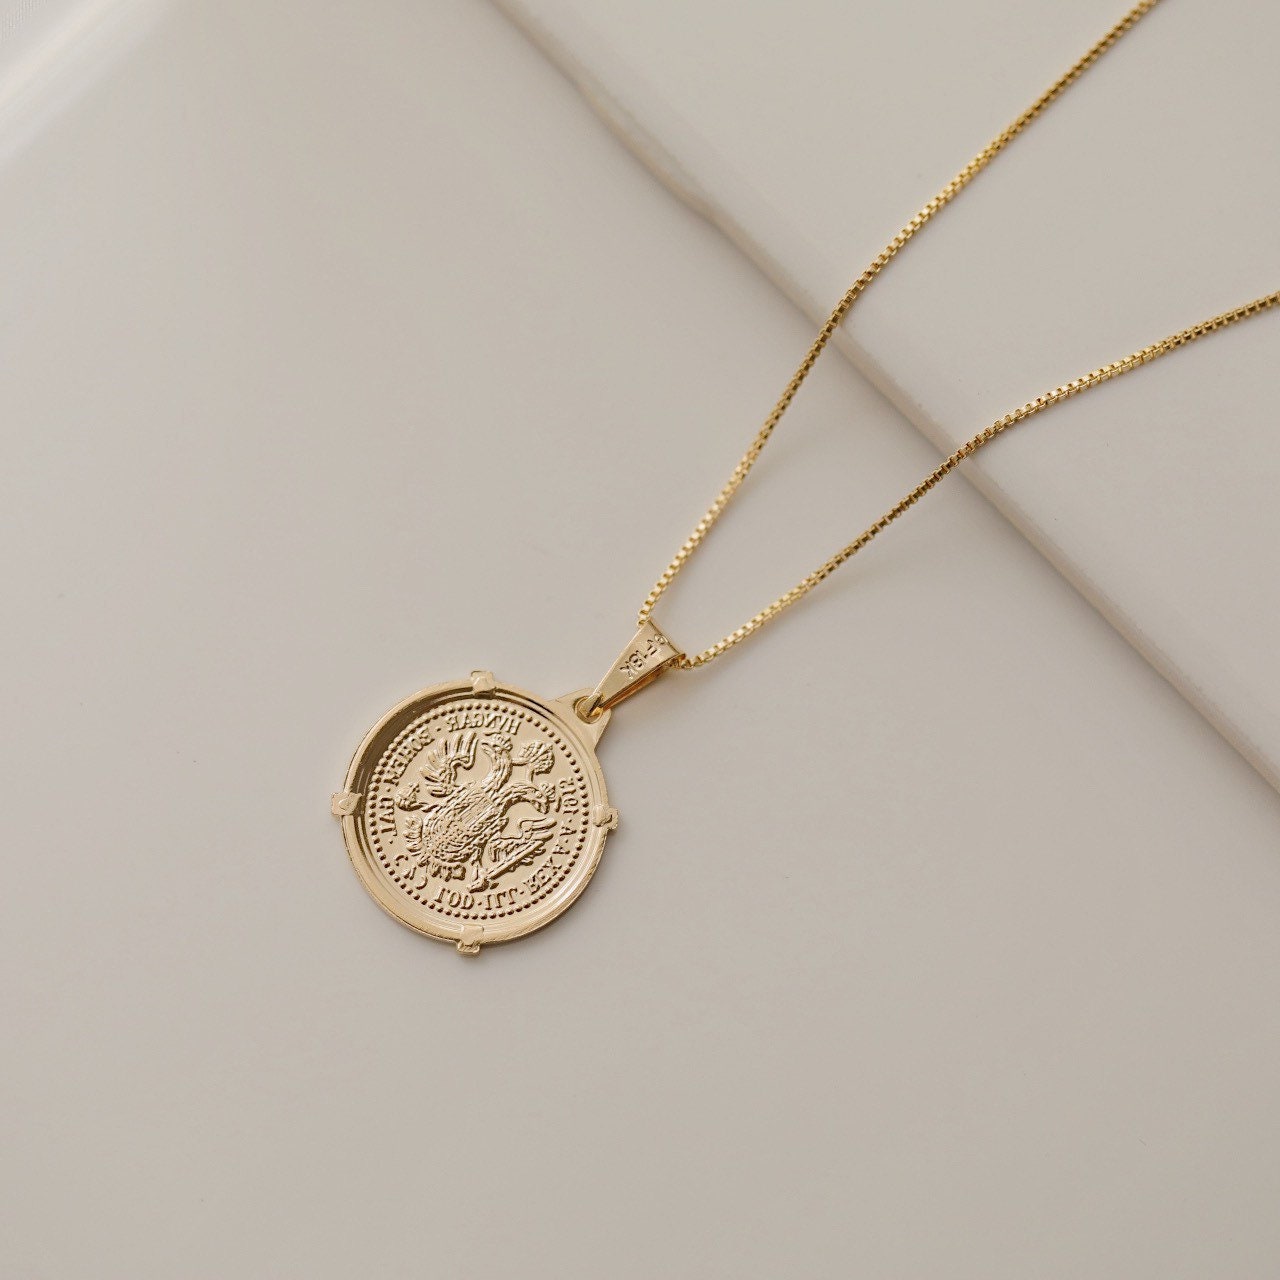 Austrian Coin Necklace 18k Gold Filled Gold Coin Pendant - Etsy